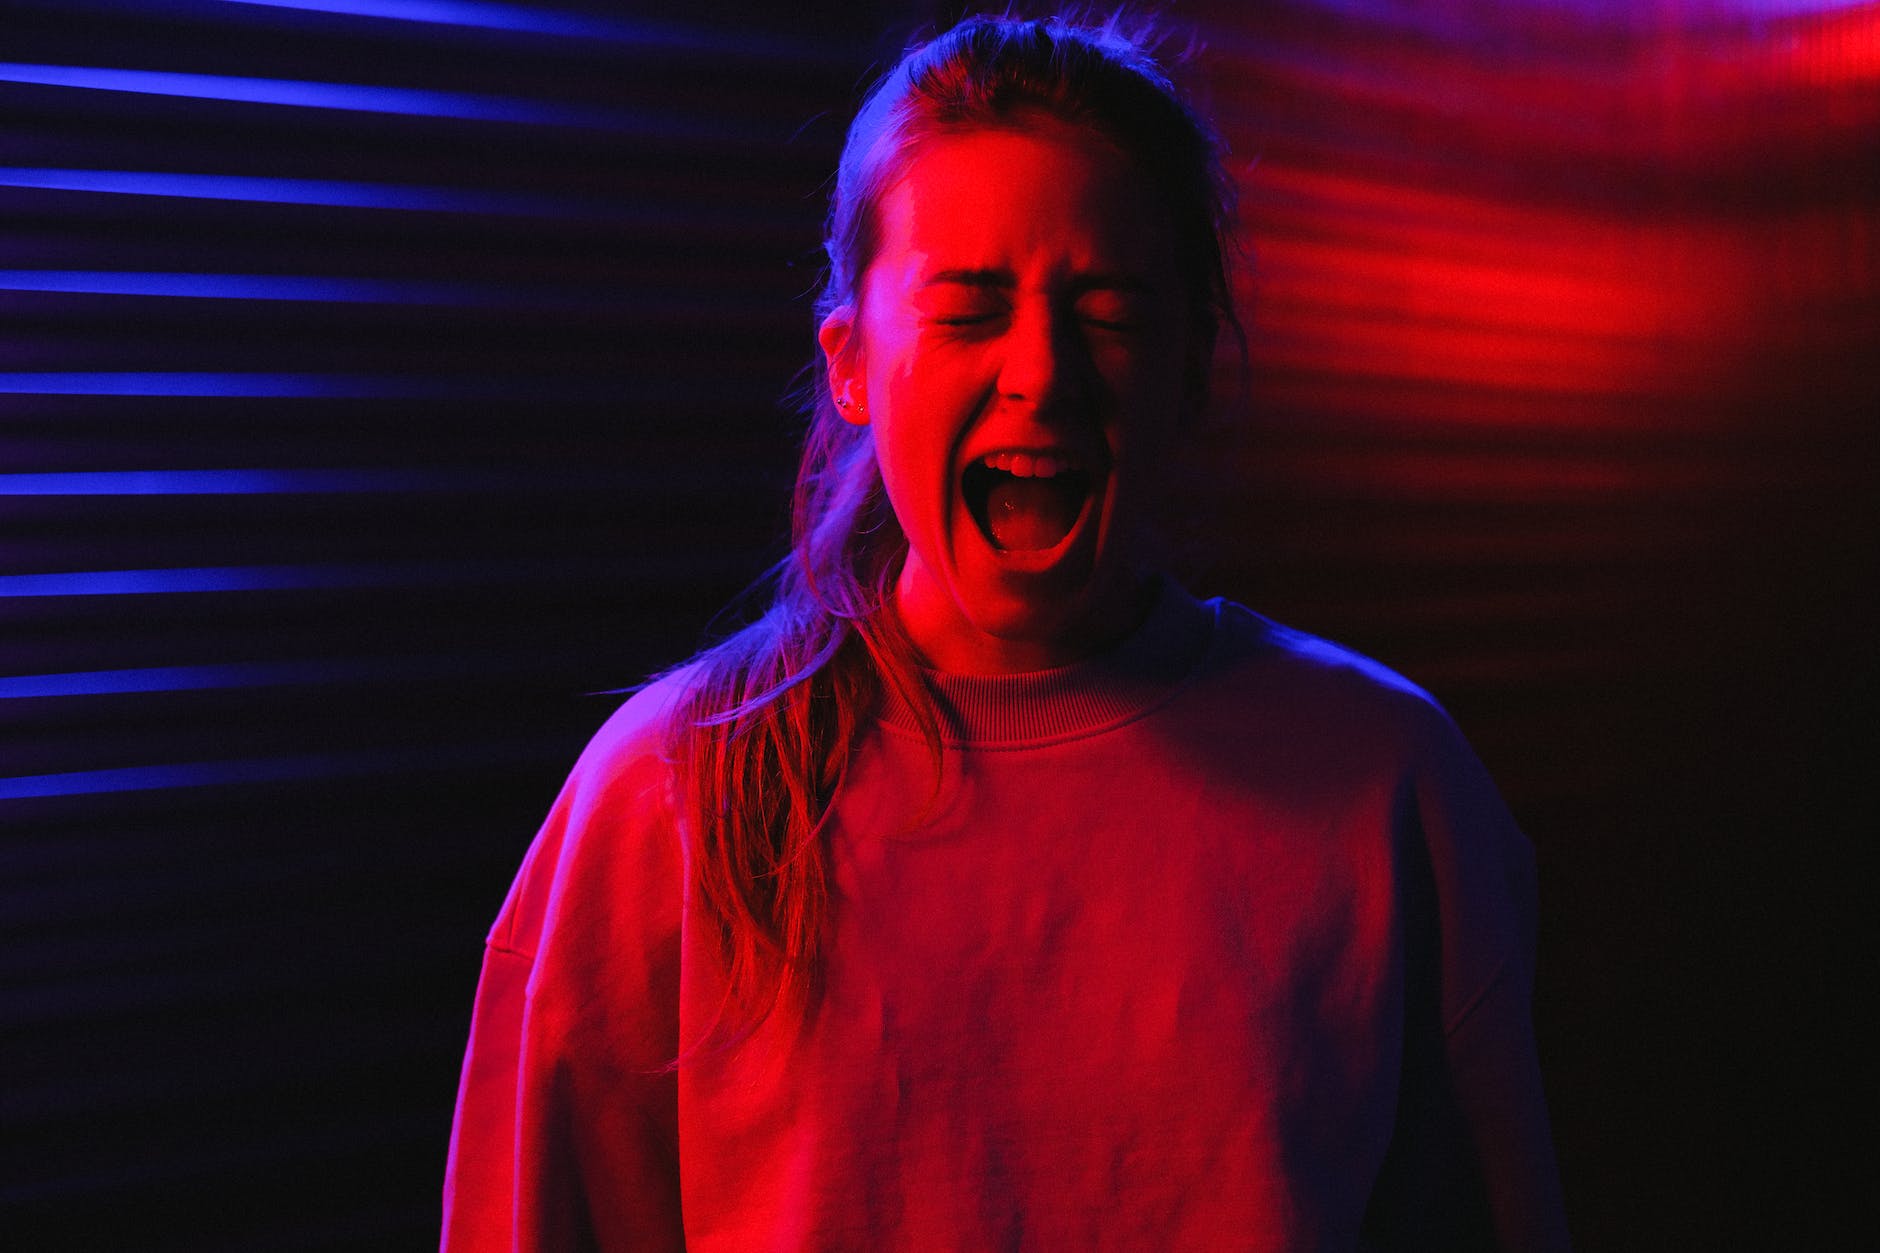 A phot of a young woman screaming with eyes closed depicting a nervous breakdown.